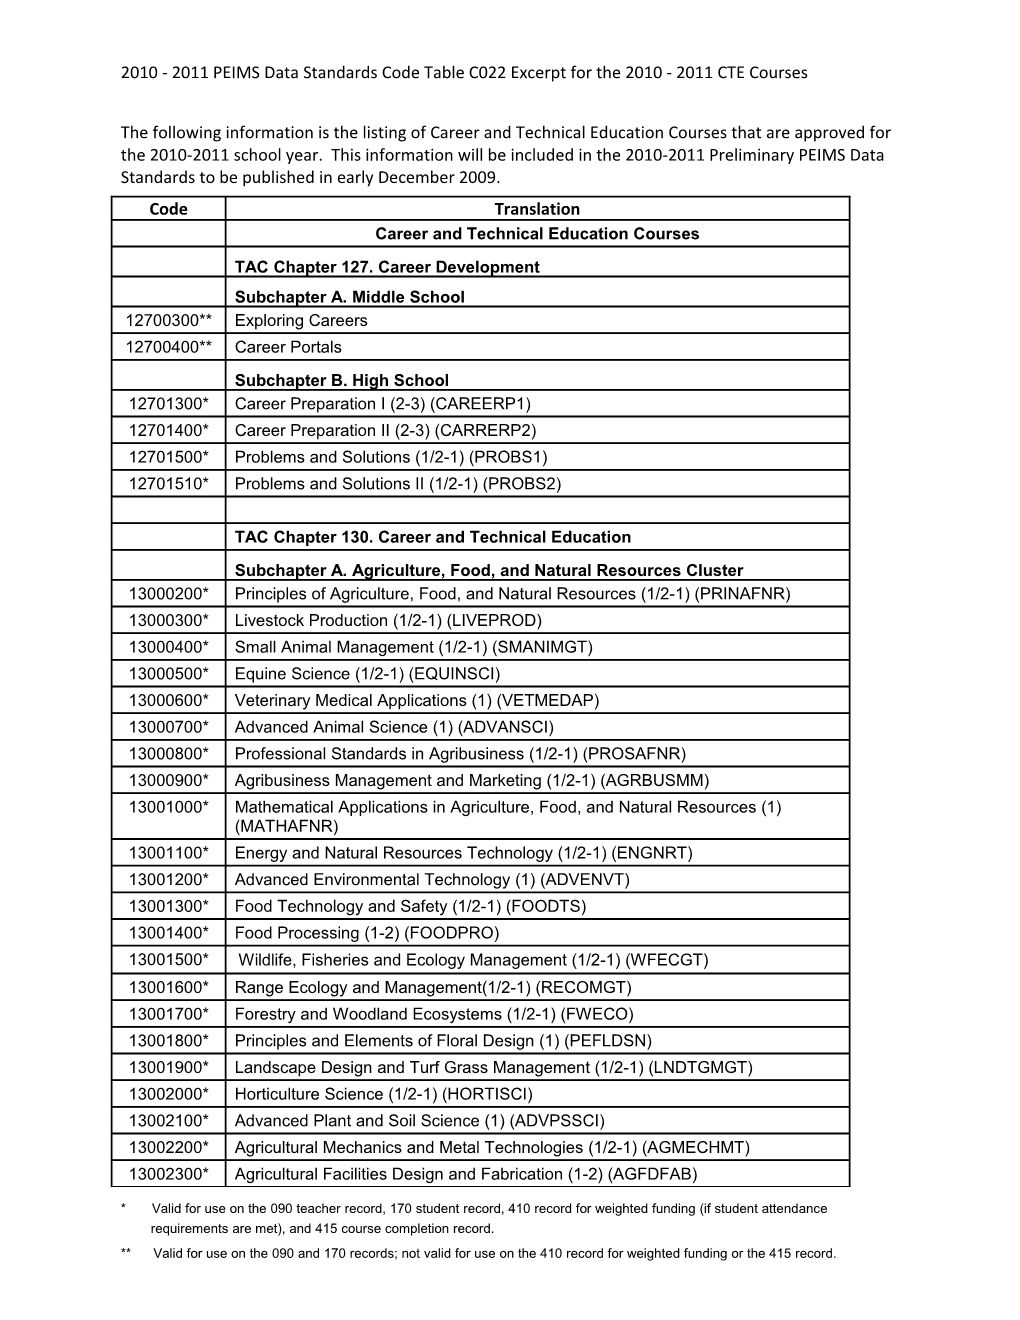 2010 - 2011 PEIMS Data Standards Code Table C022 Excerpt for the 2010 - 2011 CTE Courses